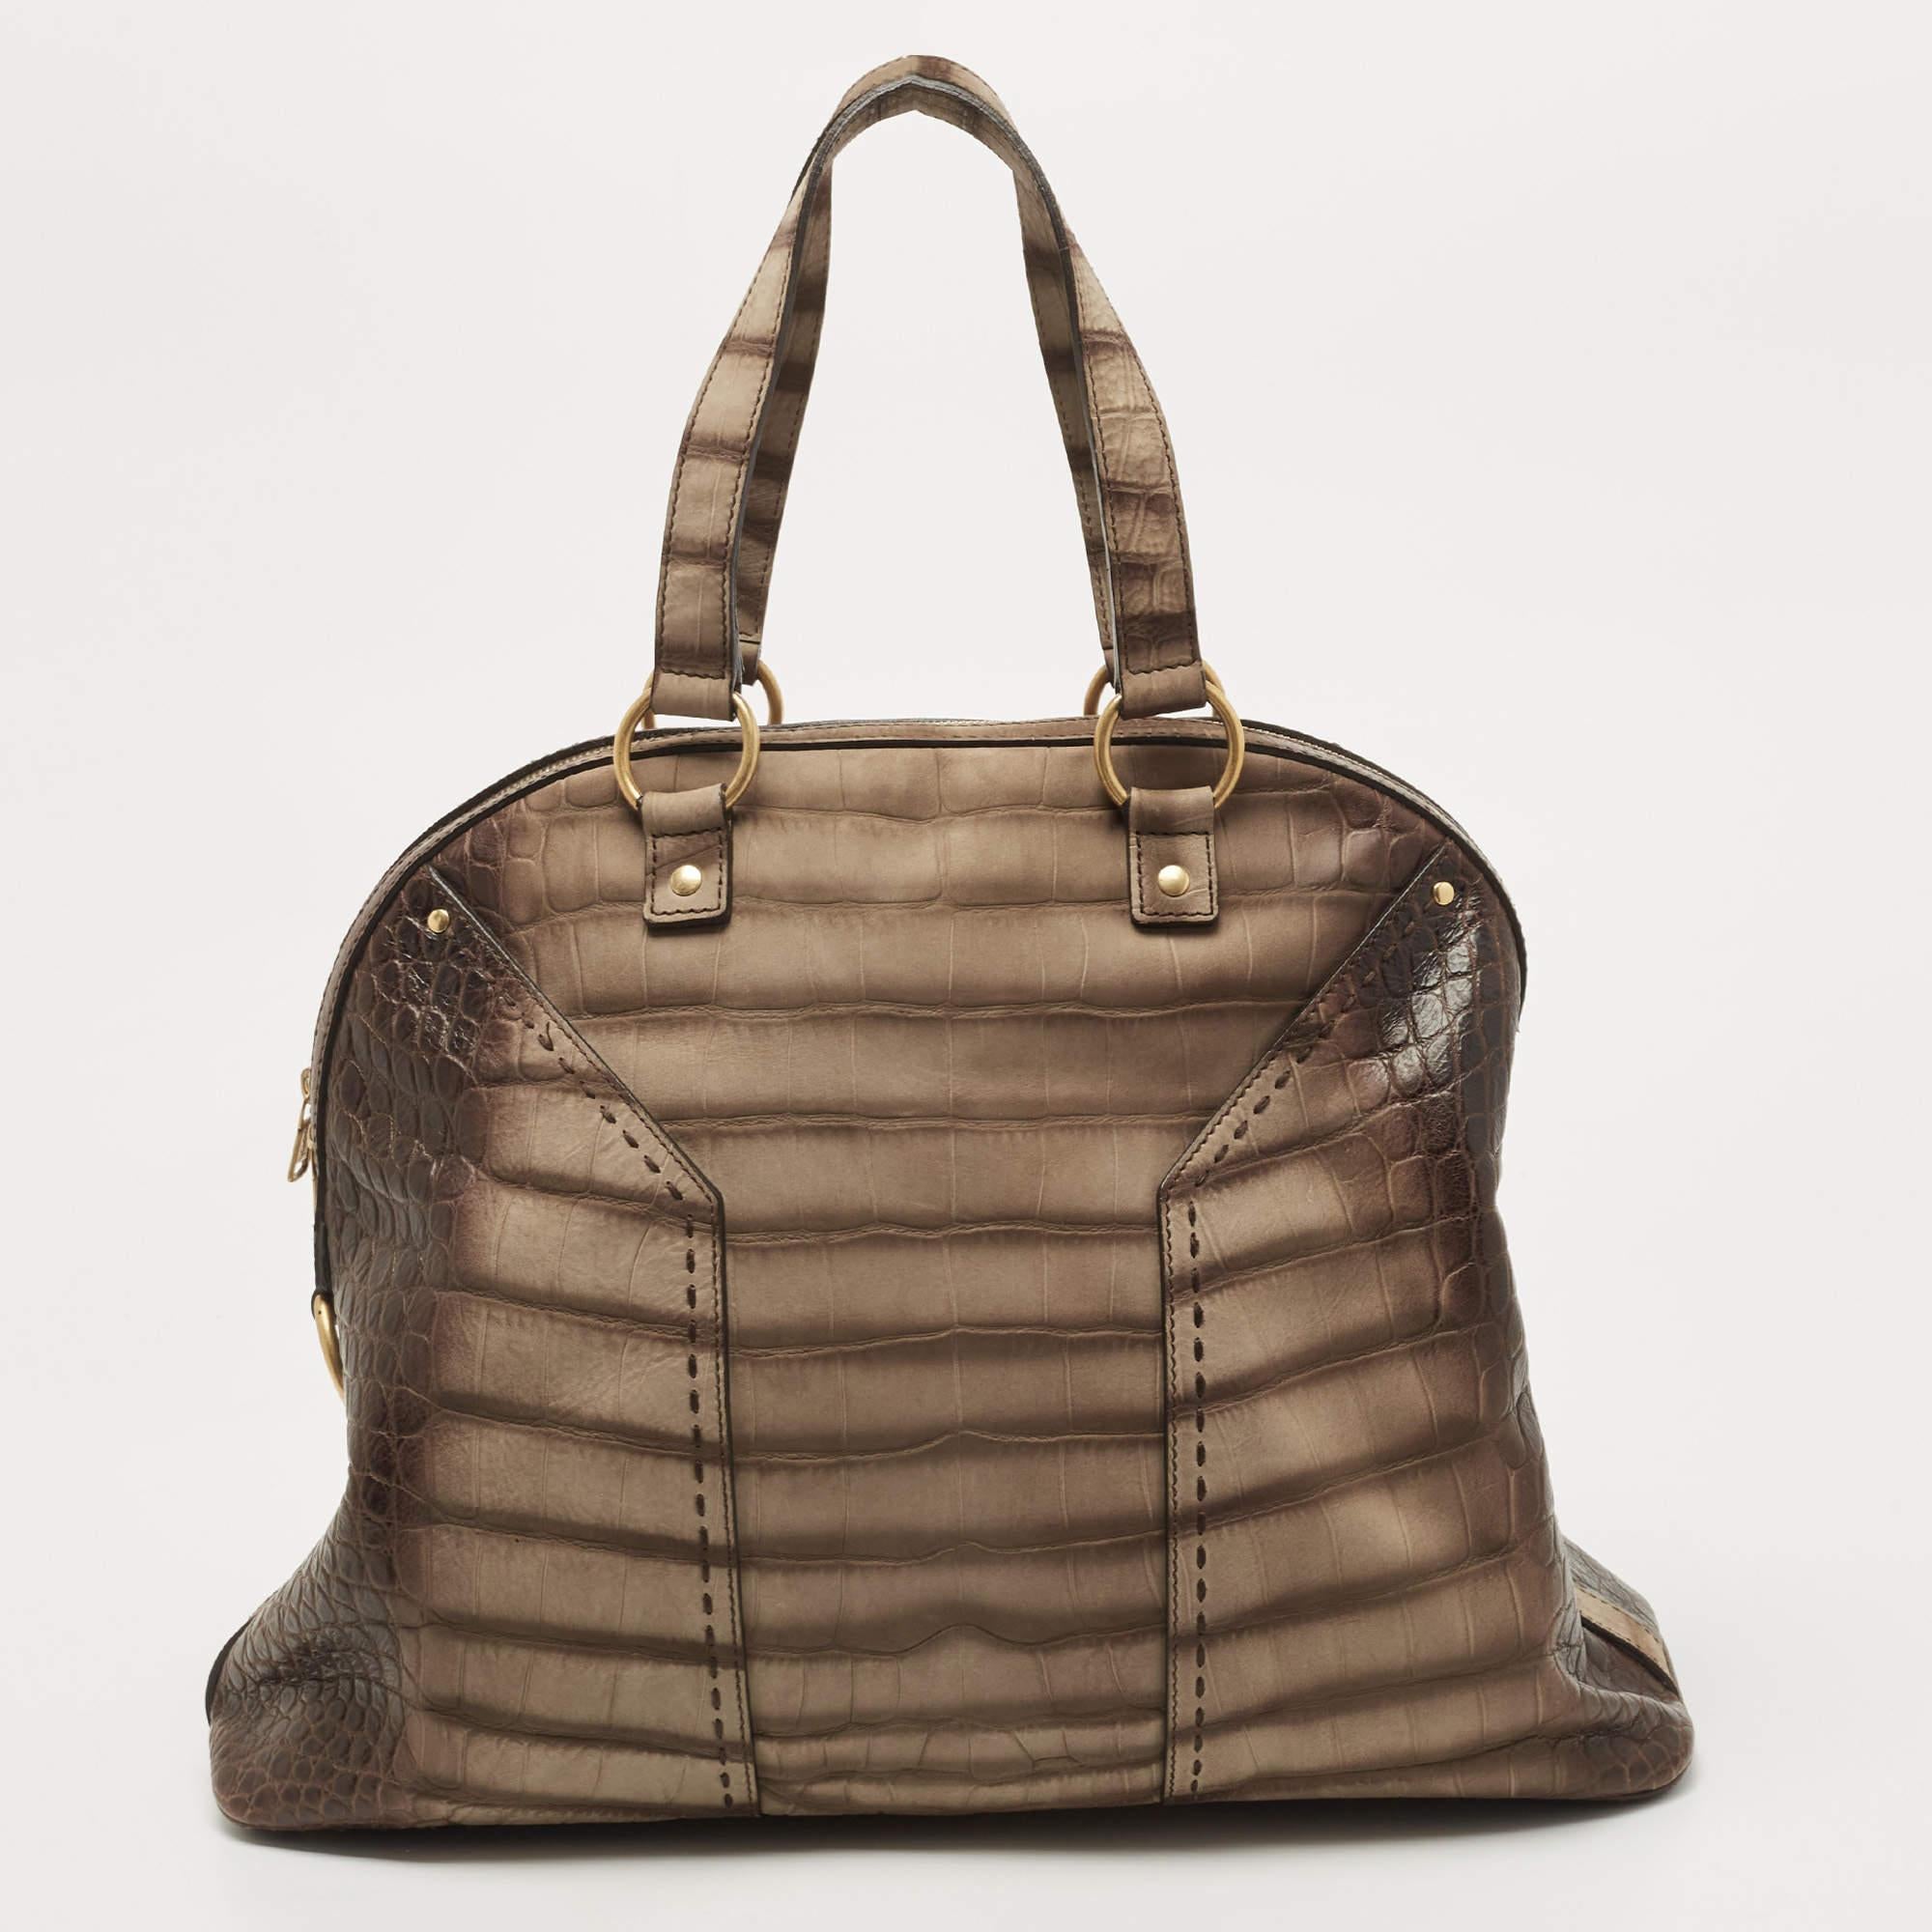 Complete an everyday look with this Yves Saint Laurent Muse bag. It has been crafted from croc-embossed leather and held by two handles. The bag has a zipper that leads to a spacious satin interior, and it is perfectly made whole by gold-tone